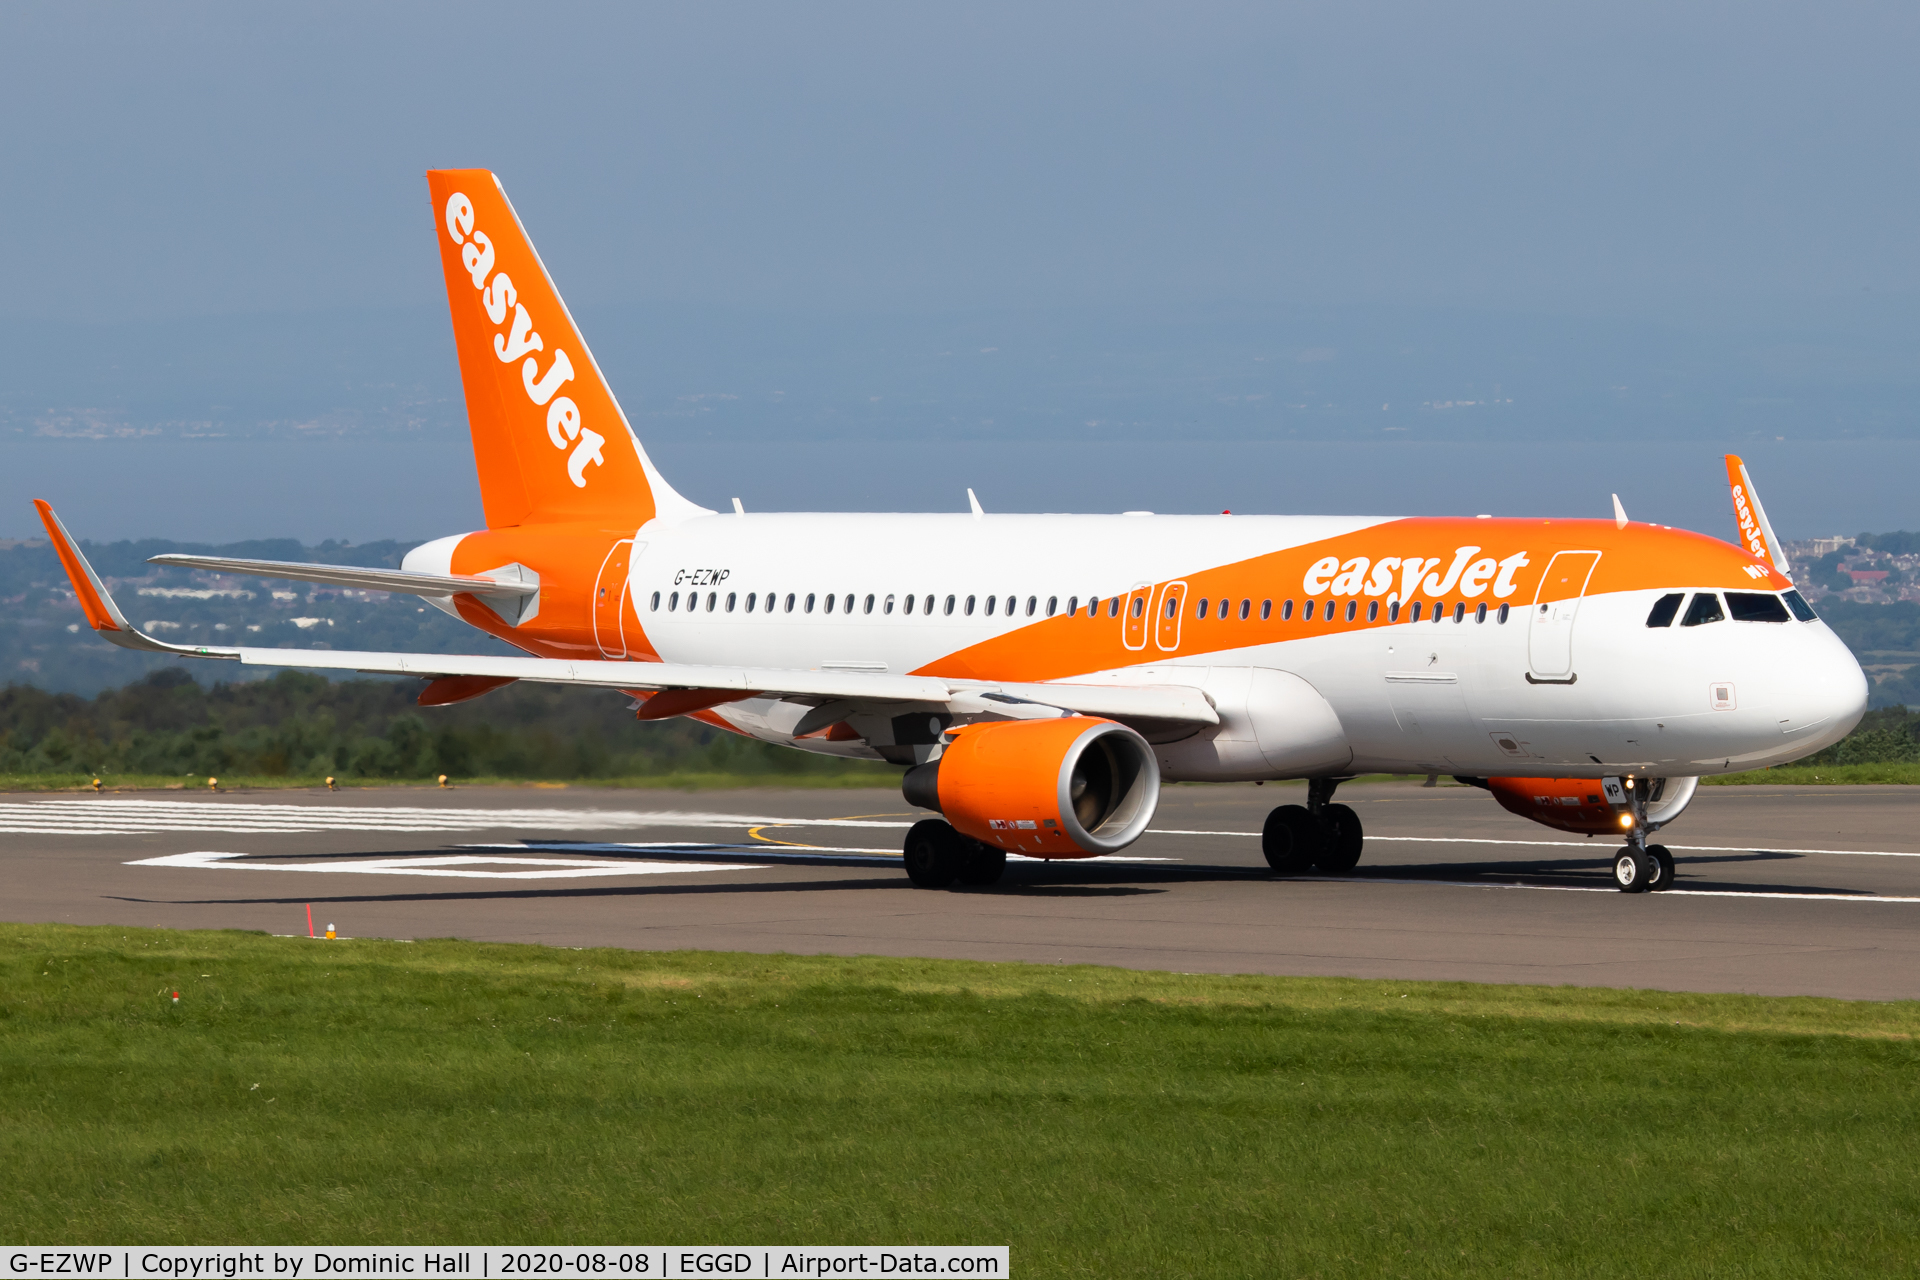 G-EZWP, 2013 Airbus A320-214 C/N 5927, BRS 08-08-20